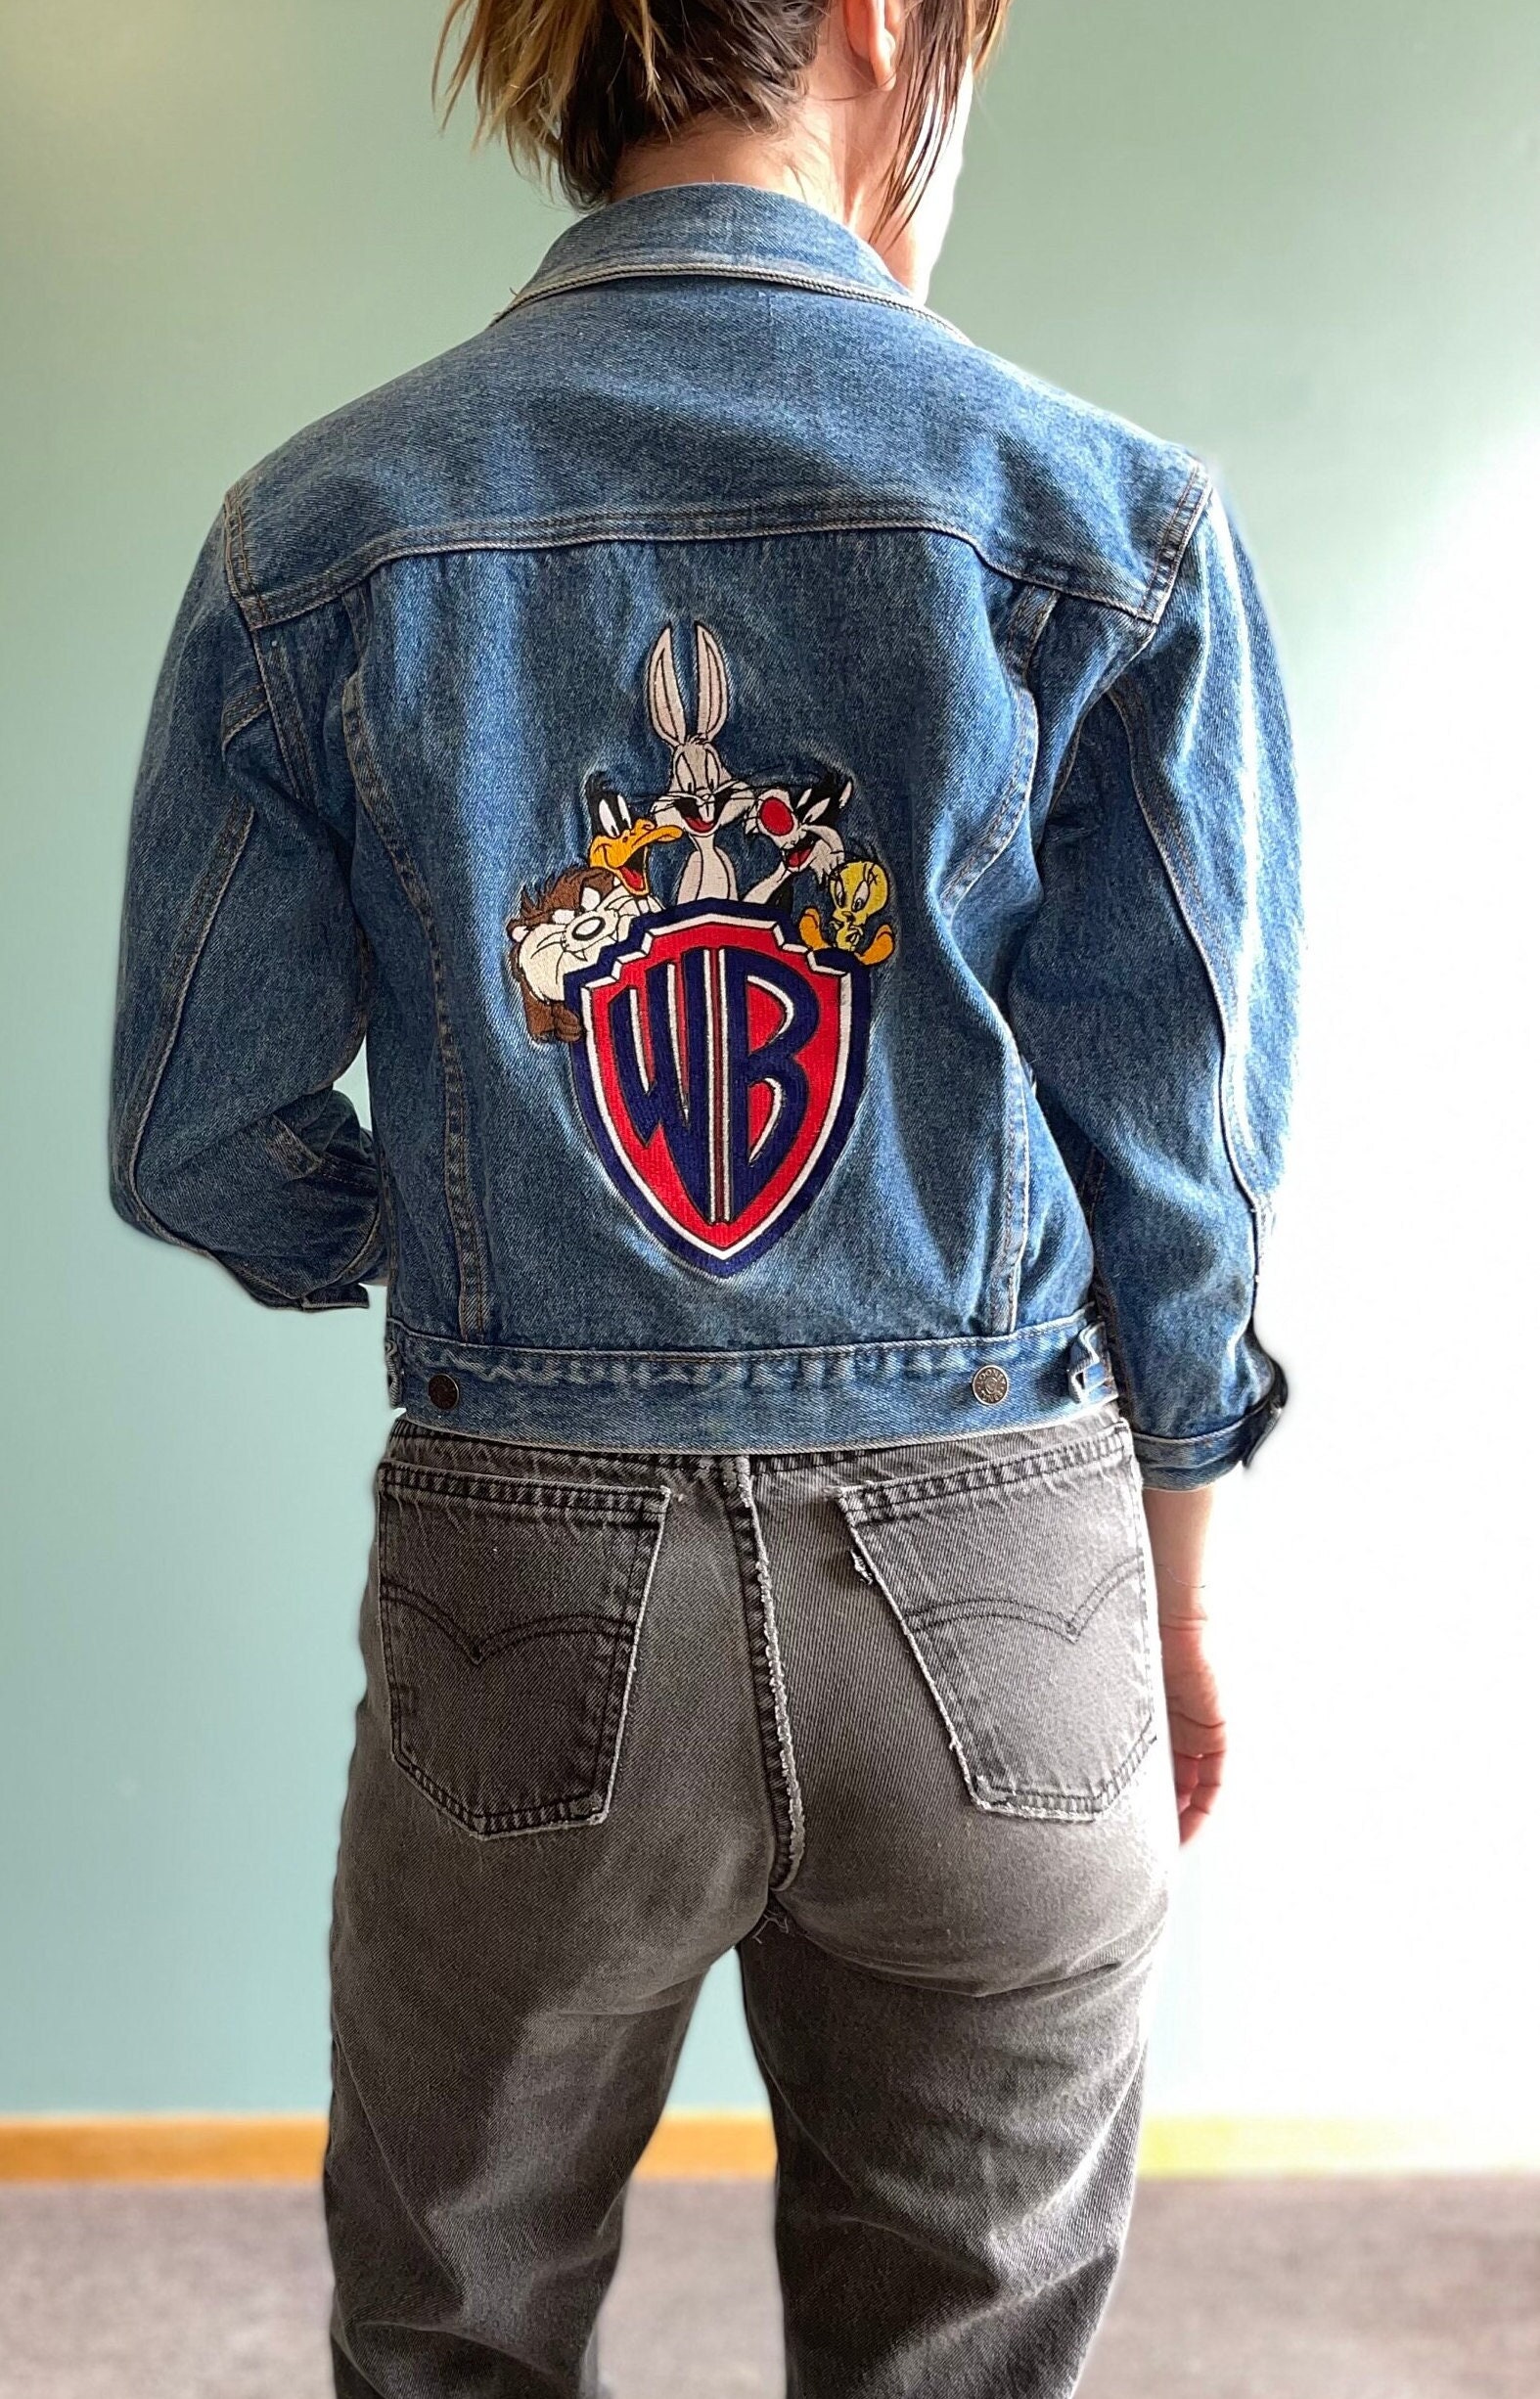 70s Antonio Guiseppe Looney Tunes Jacket w/ Taz and Bugs Bunny Embroidery 